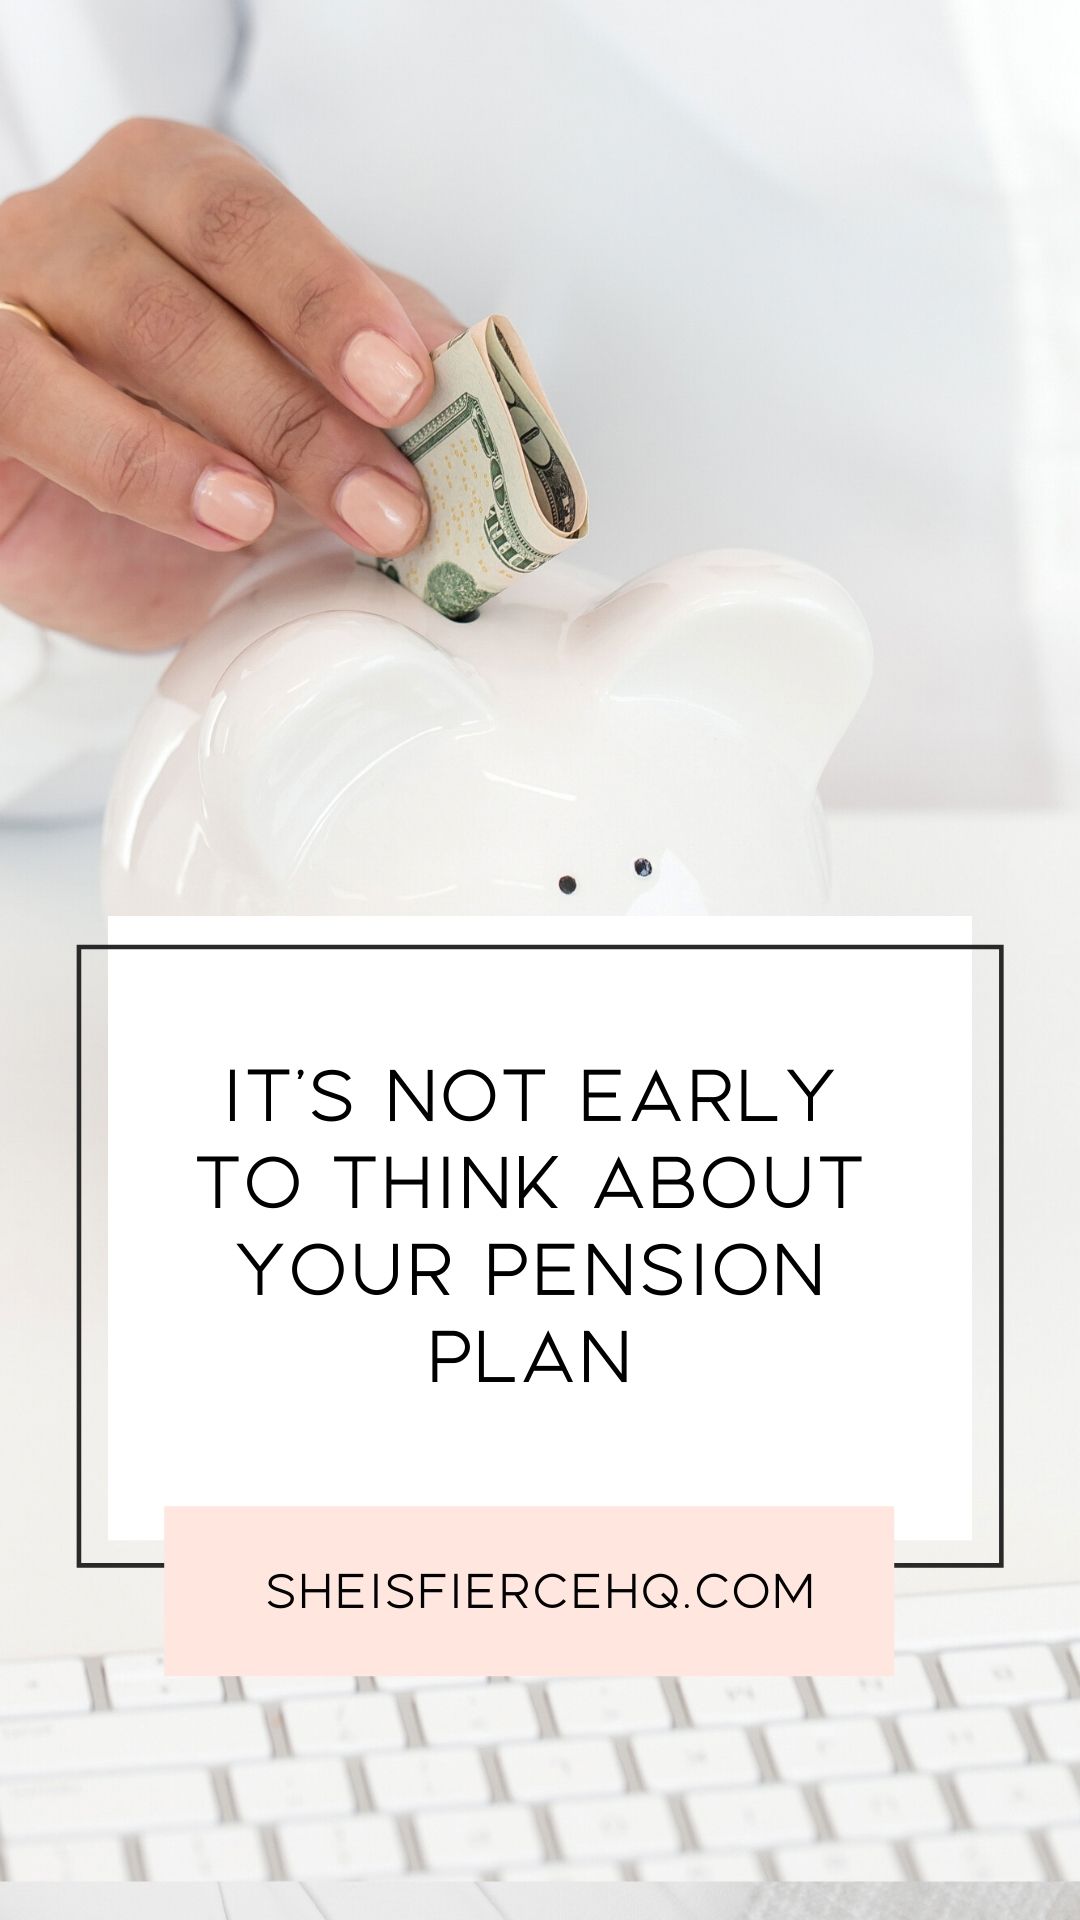 It's Not Early to Think About Your Pension Plan